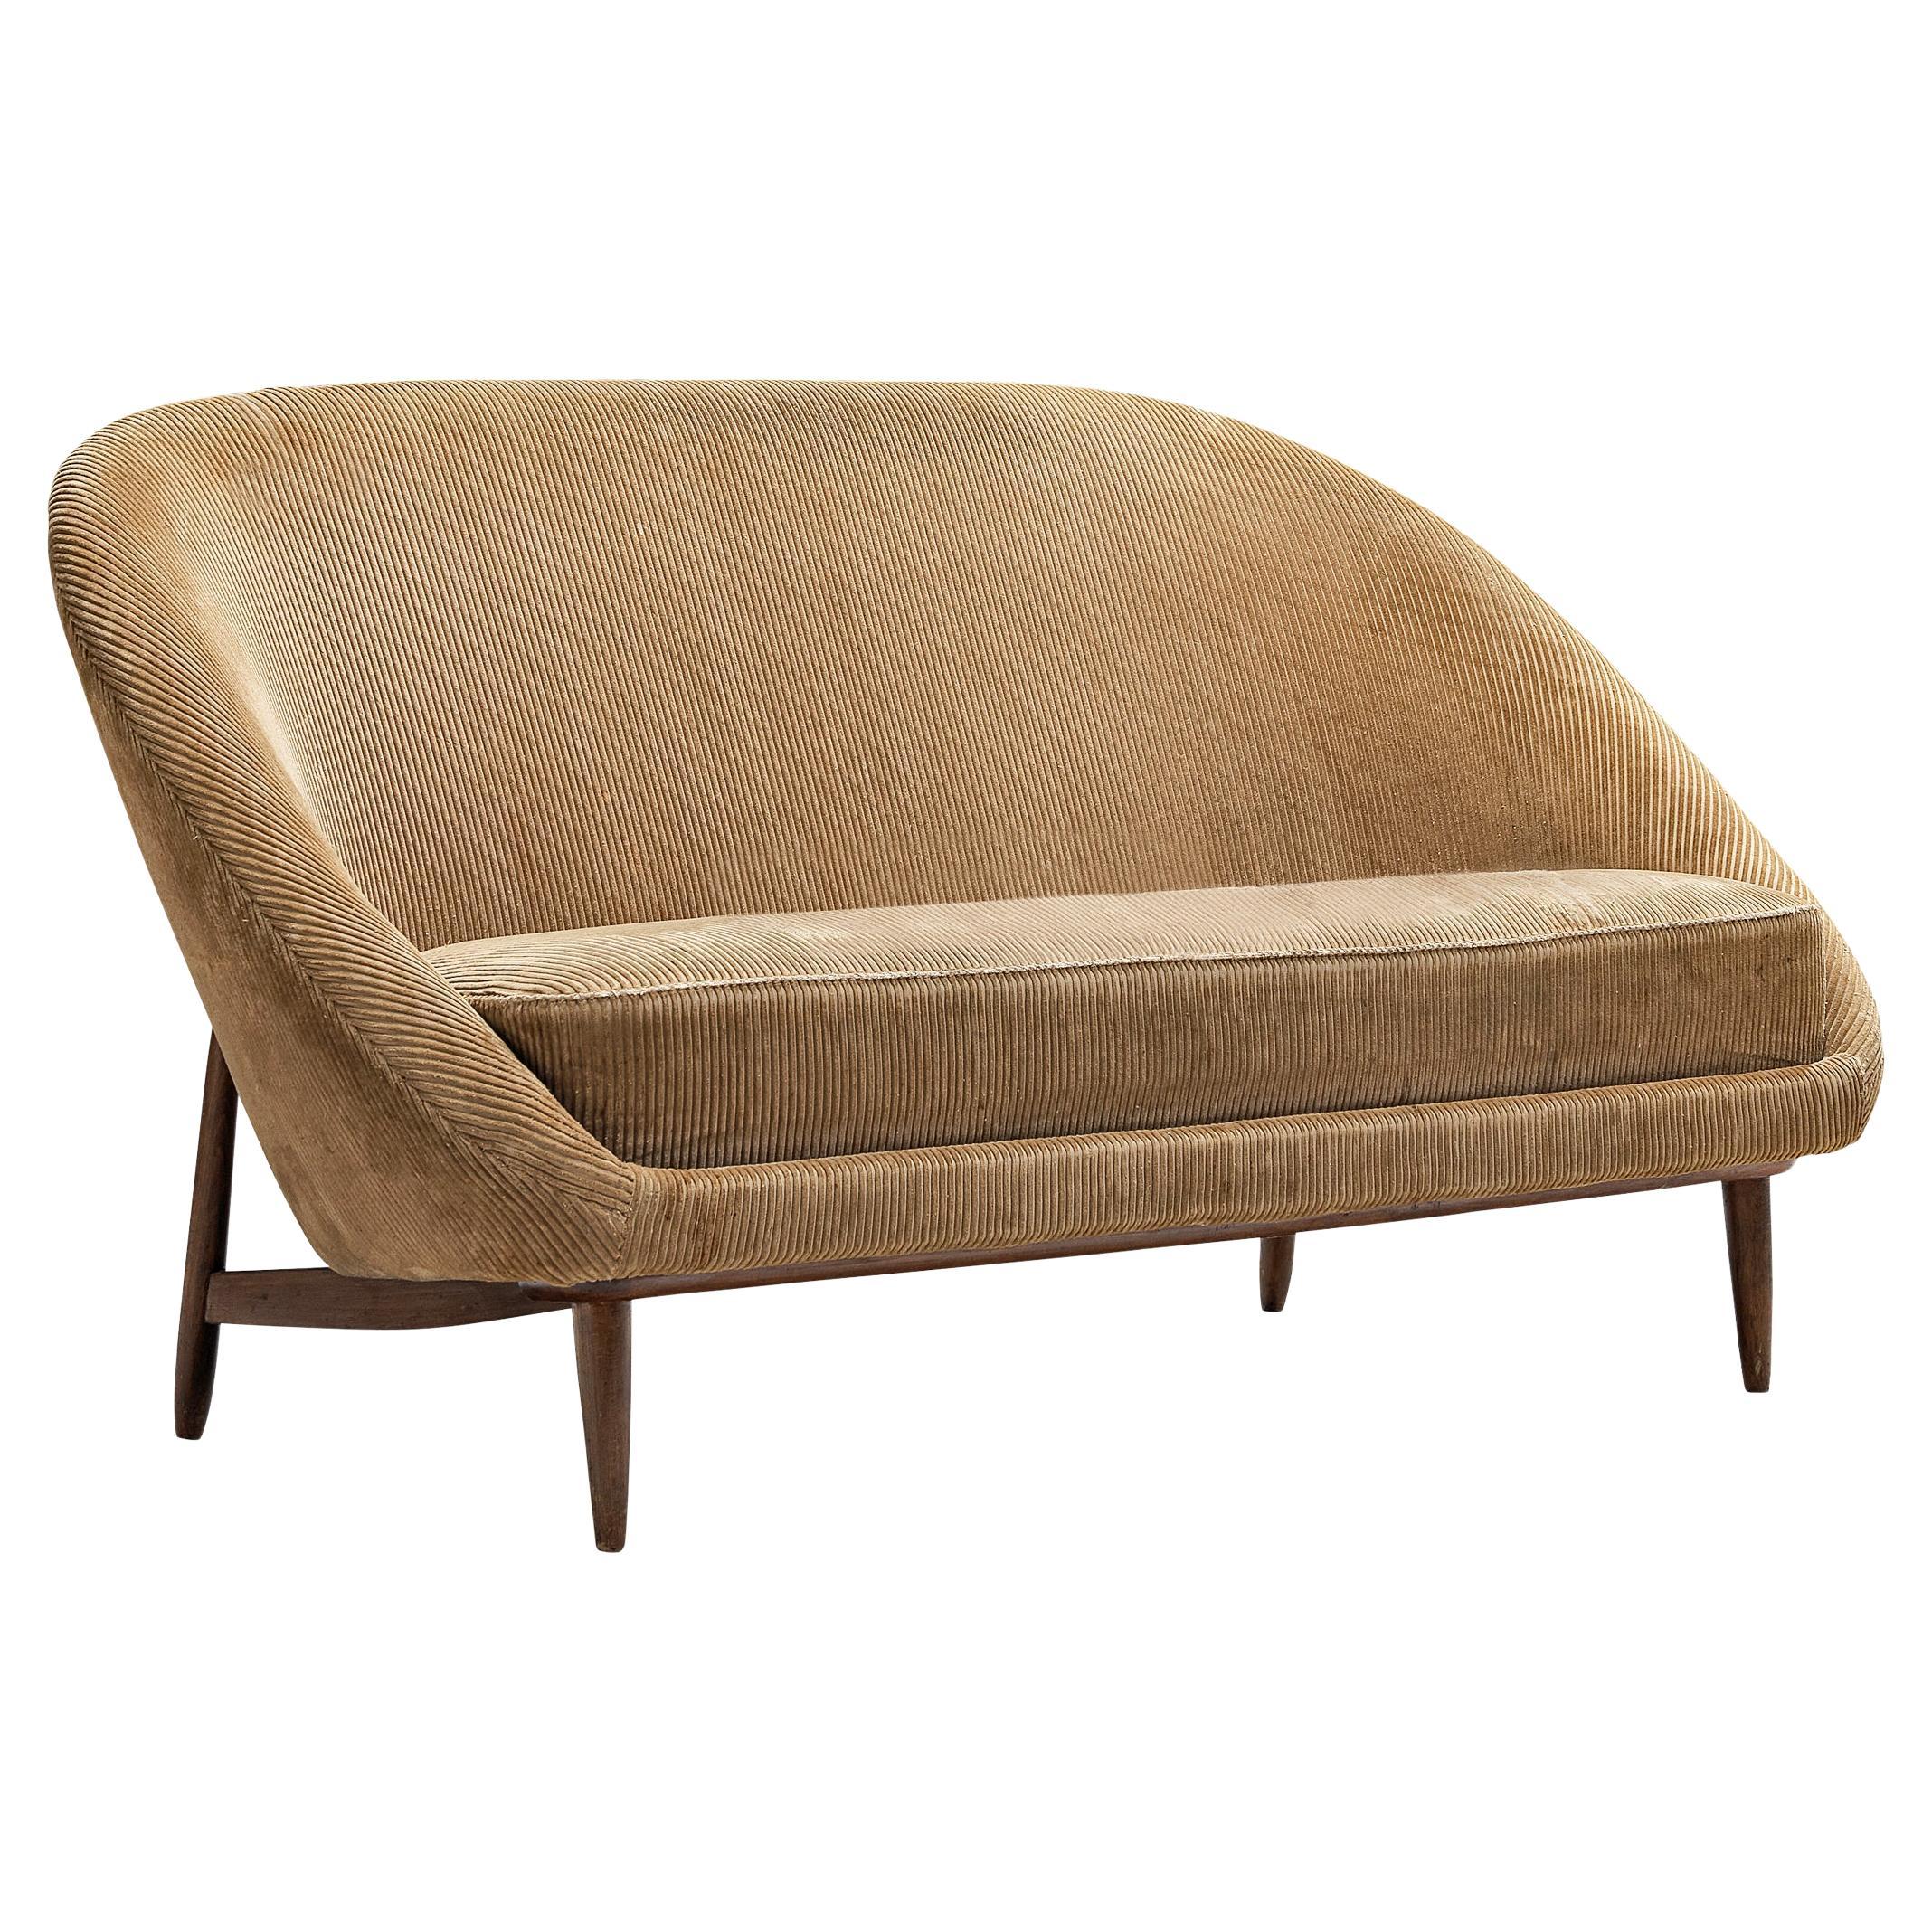 Theo Ruth for Artifort Sofa in Beige Corduroy Upholstery 